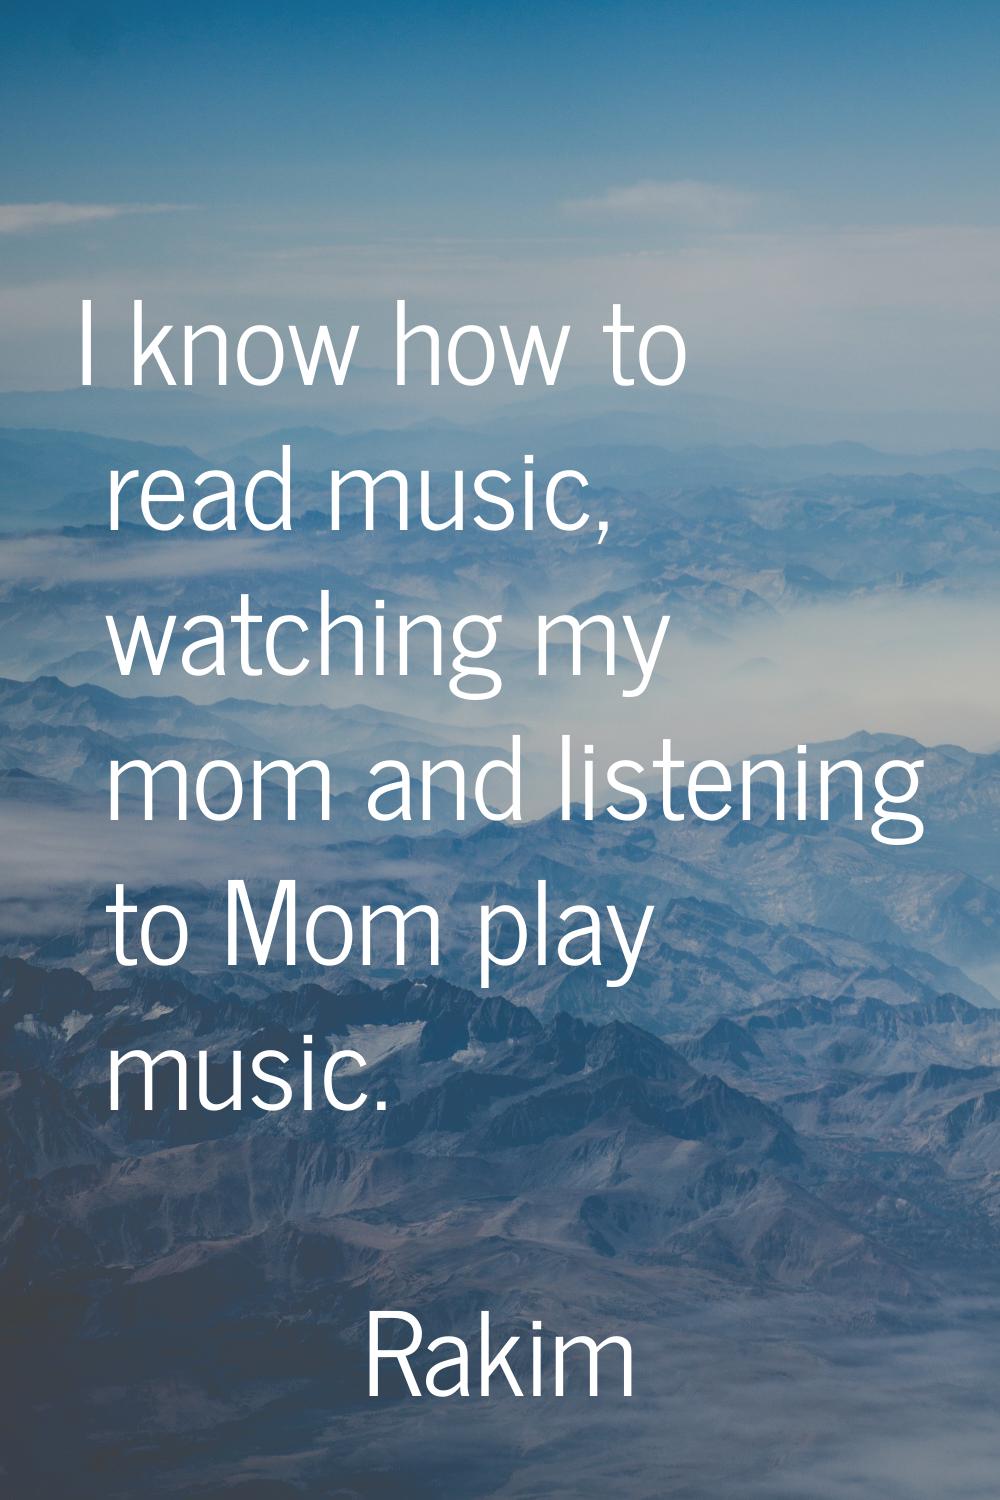 I know how to read music, watching my mom and listening to Mom play music.